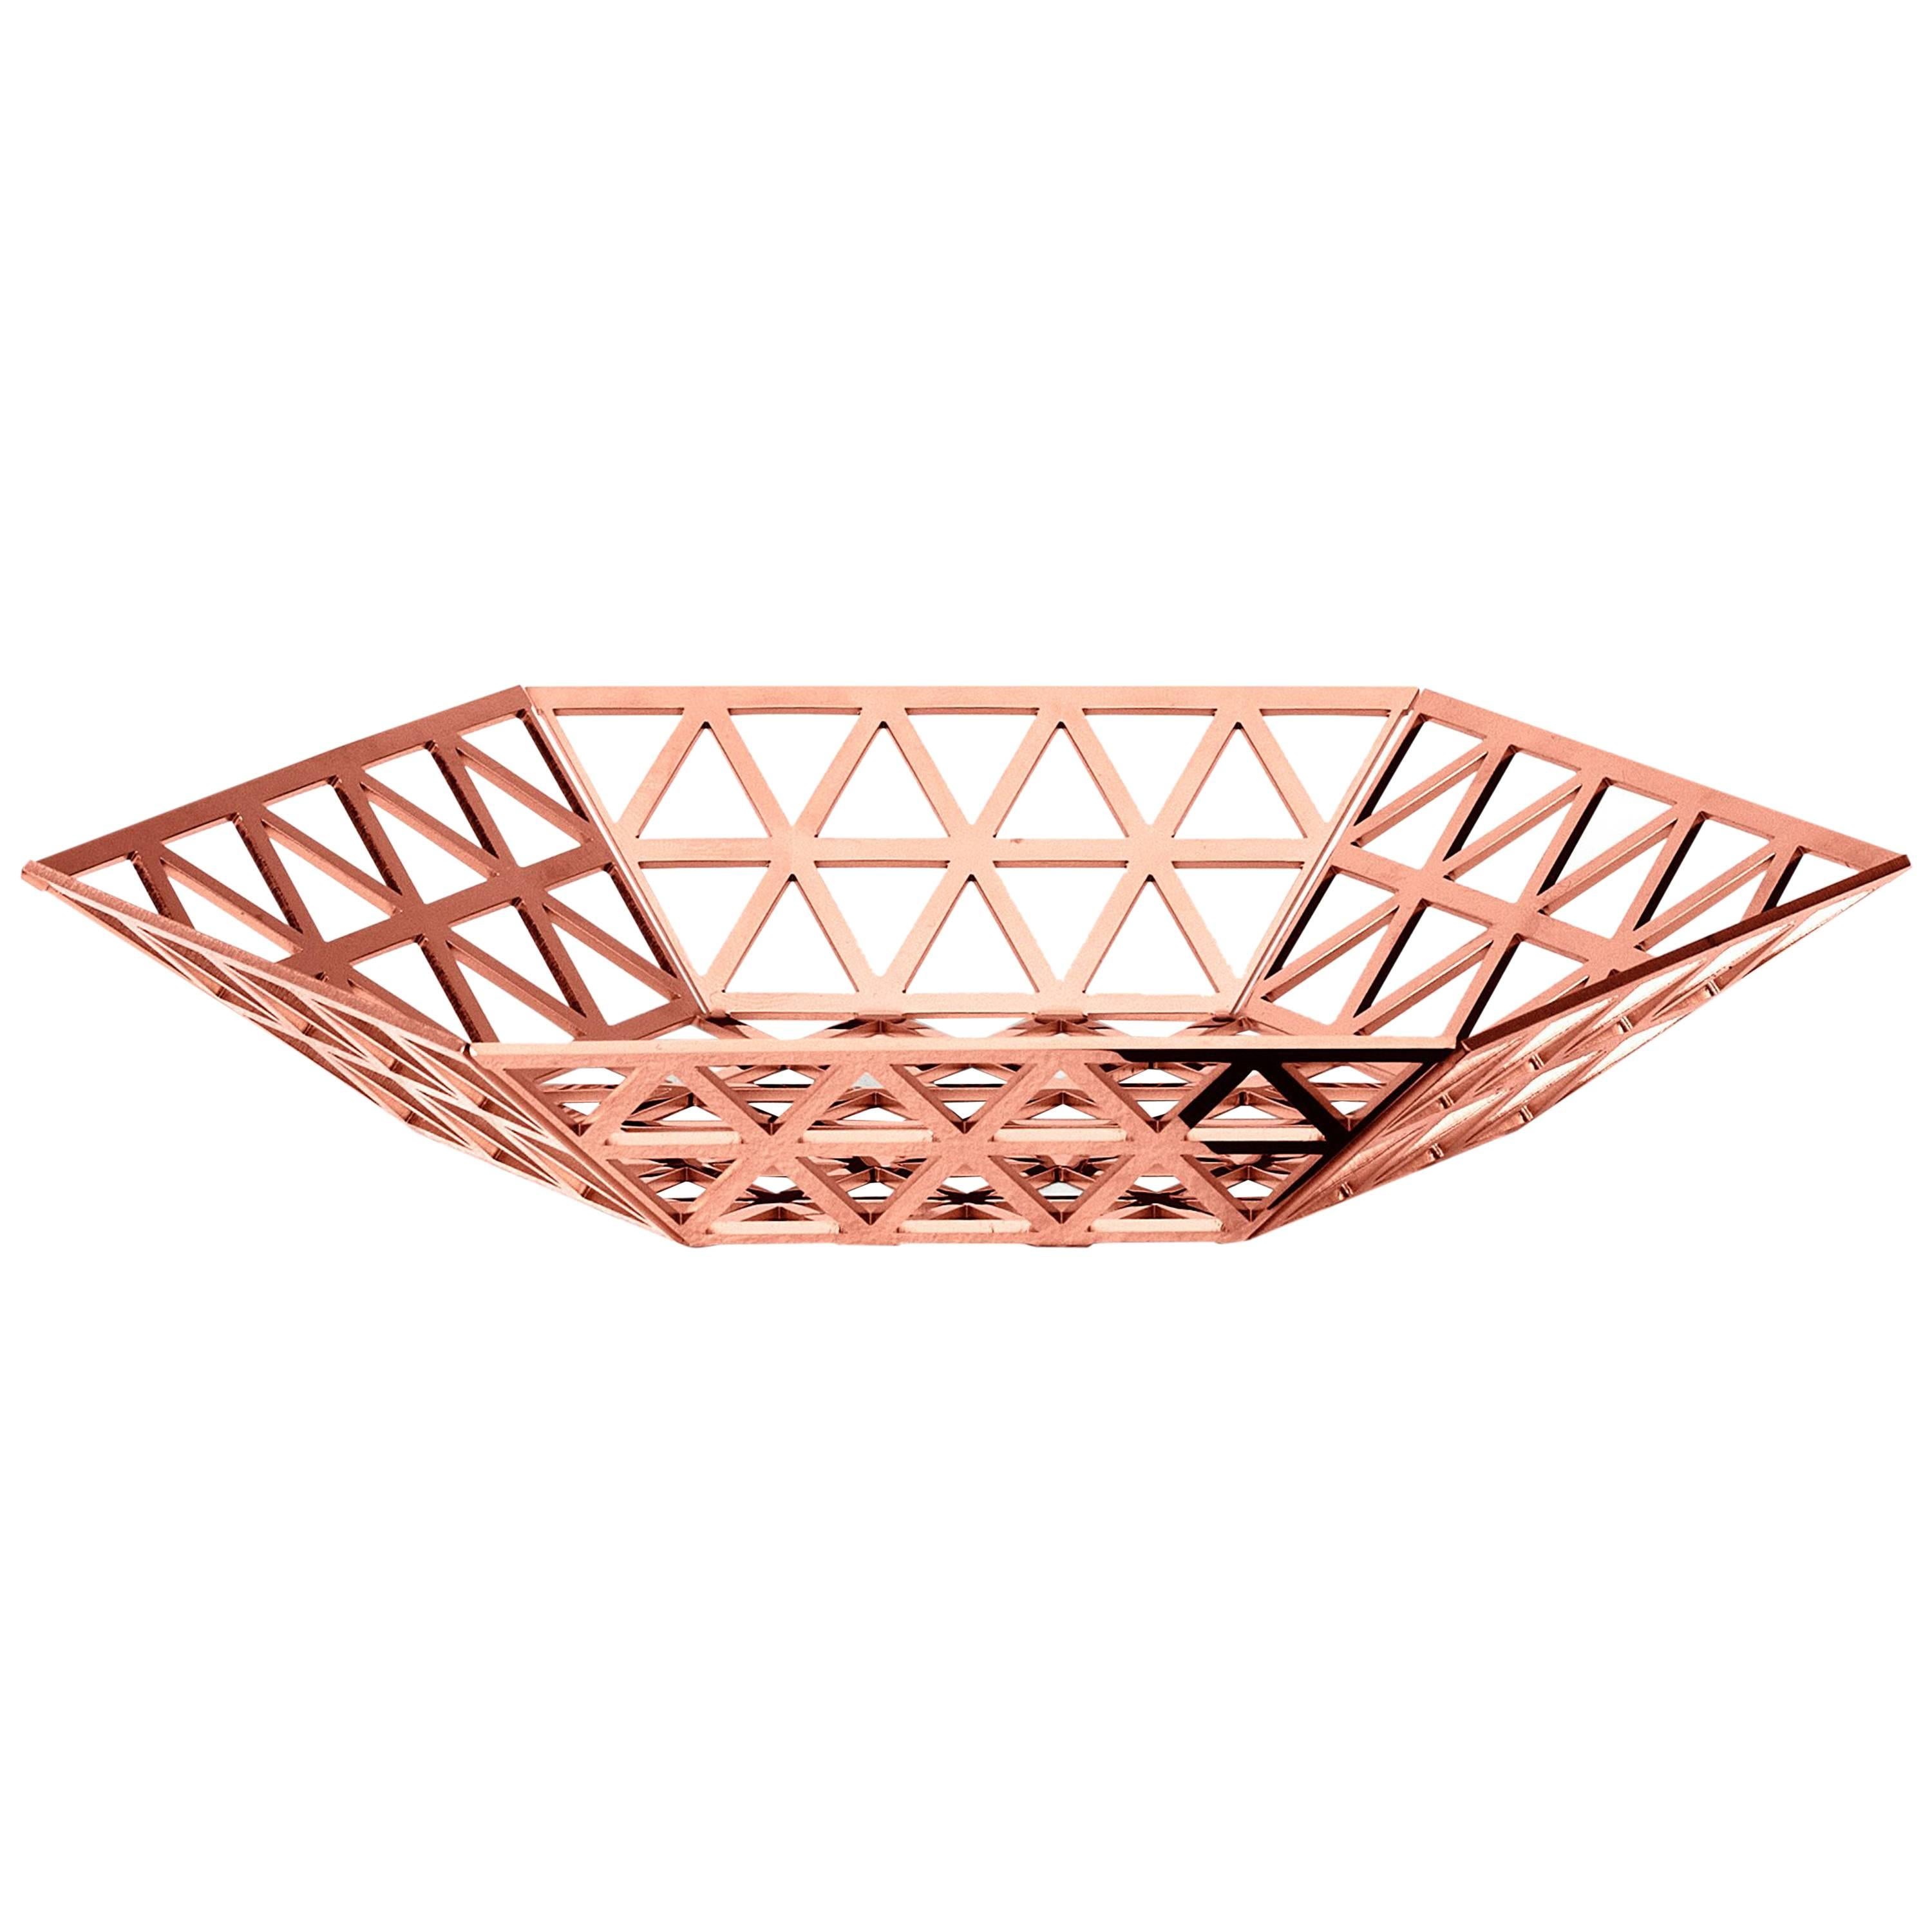 Ghidini 1961 Tip Top Flat Tray in Rose Gold Finish For Sale